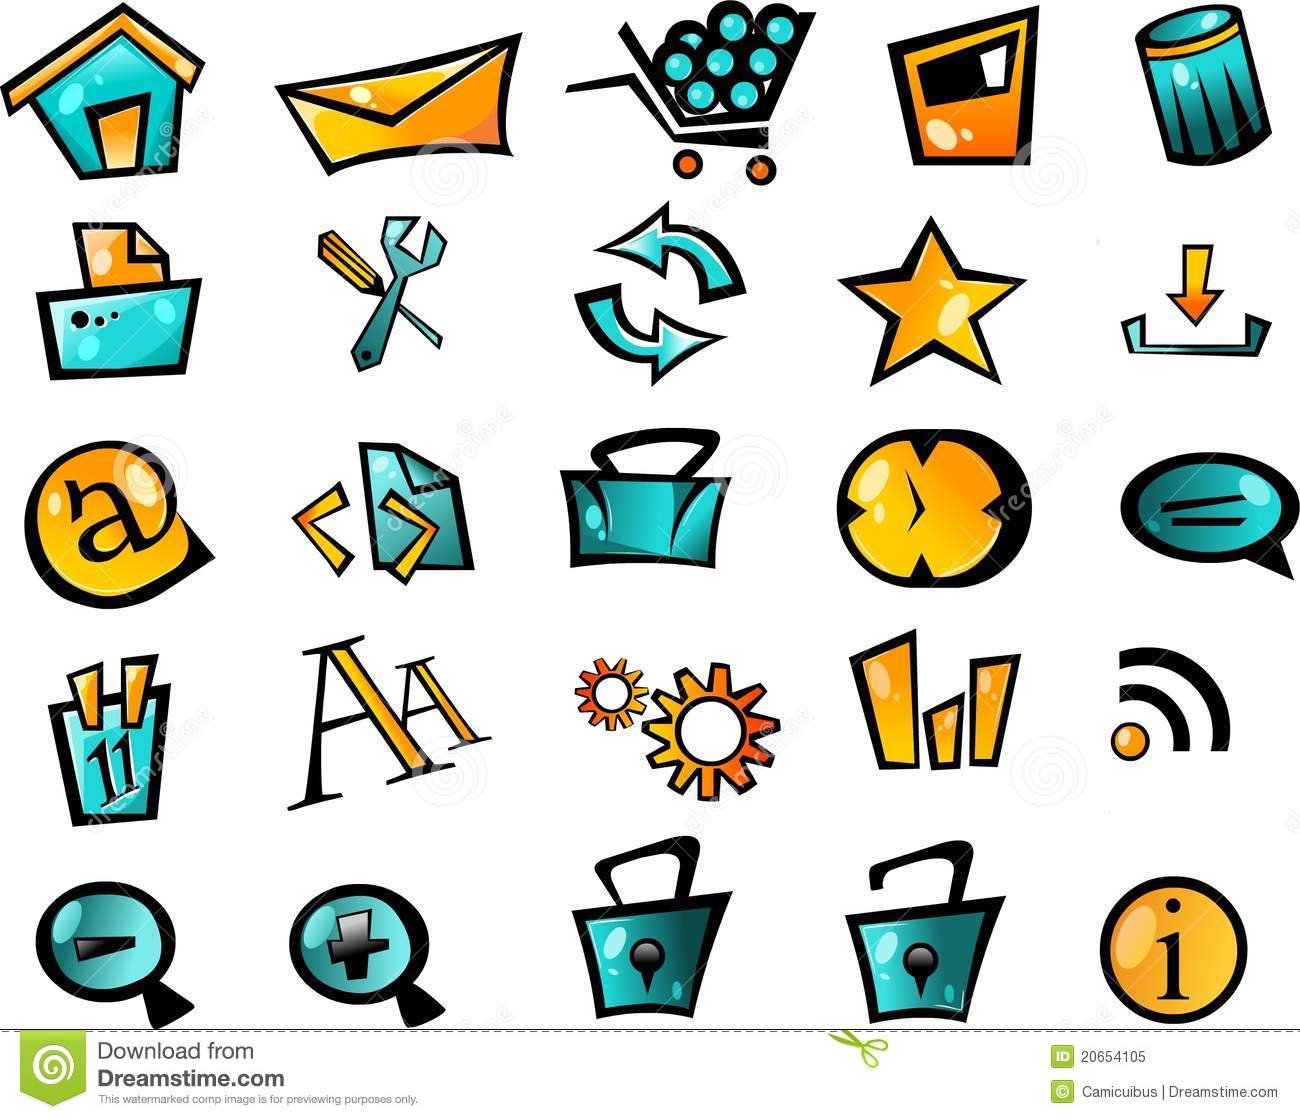 Free Icons for Computer Desktop